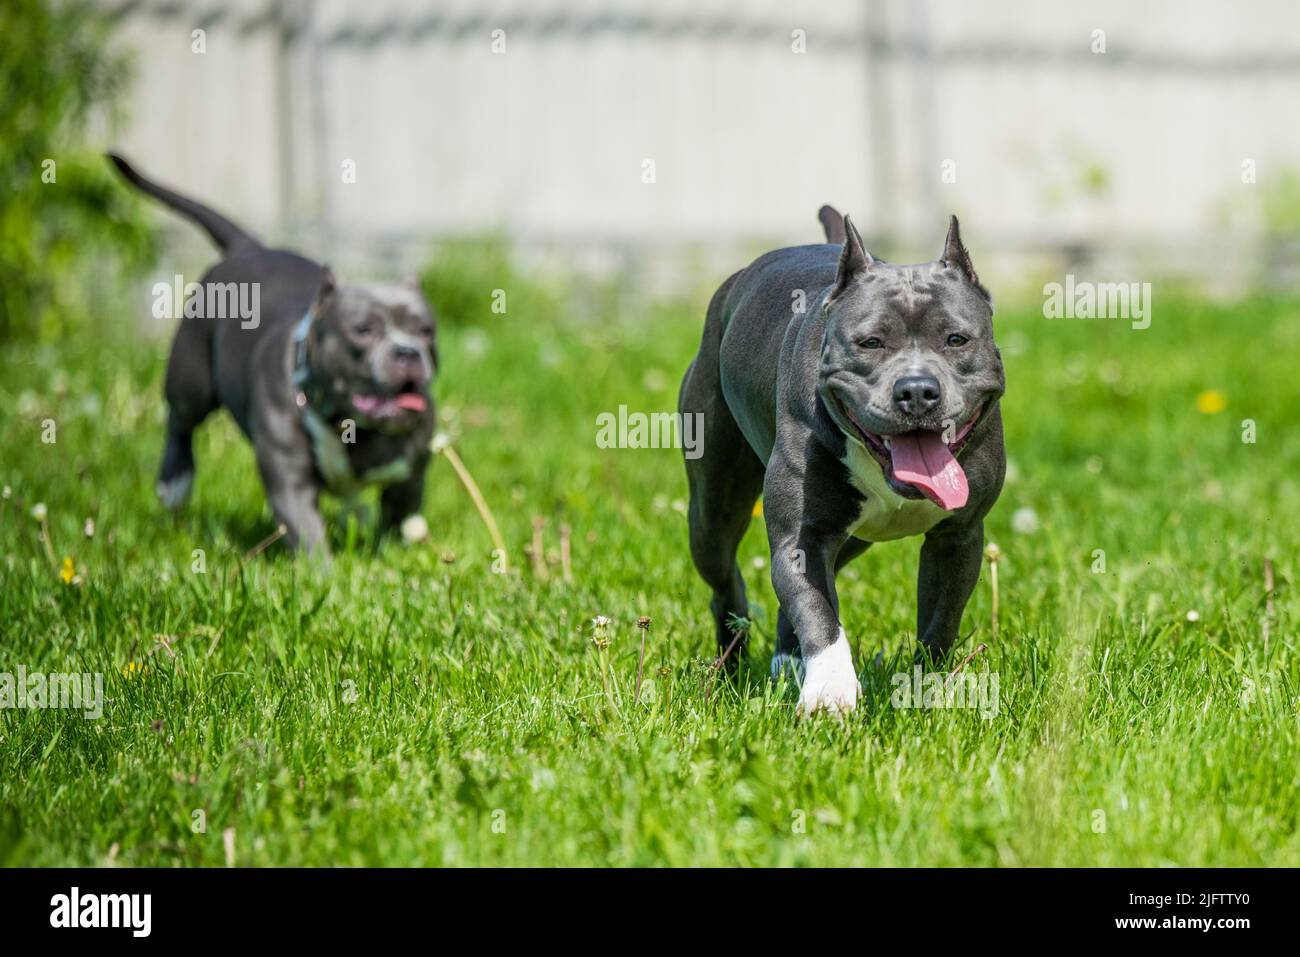 Blue hair American Staffordshire Terrier dog moving Stock Photo